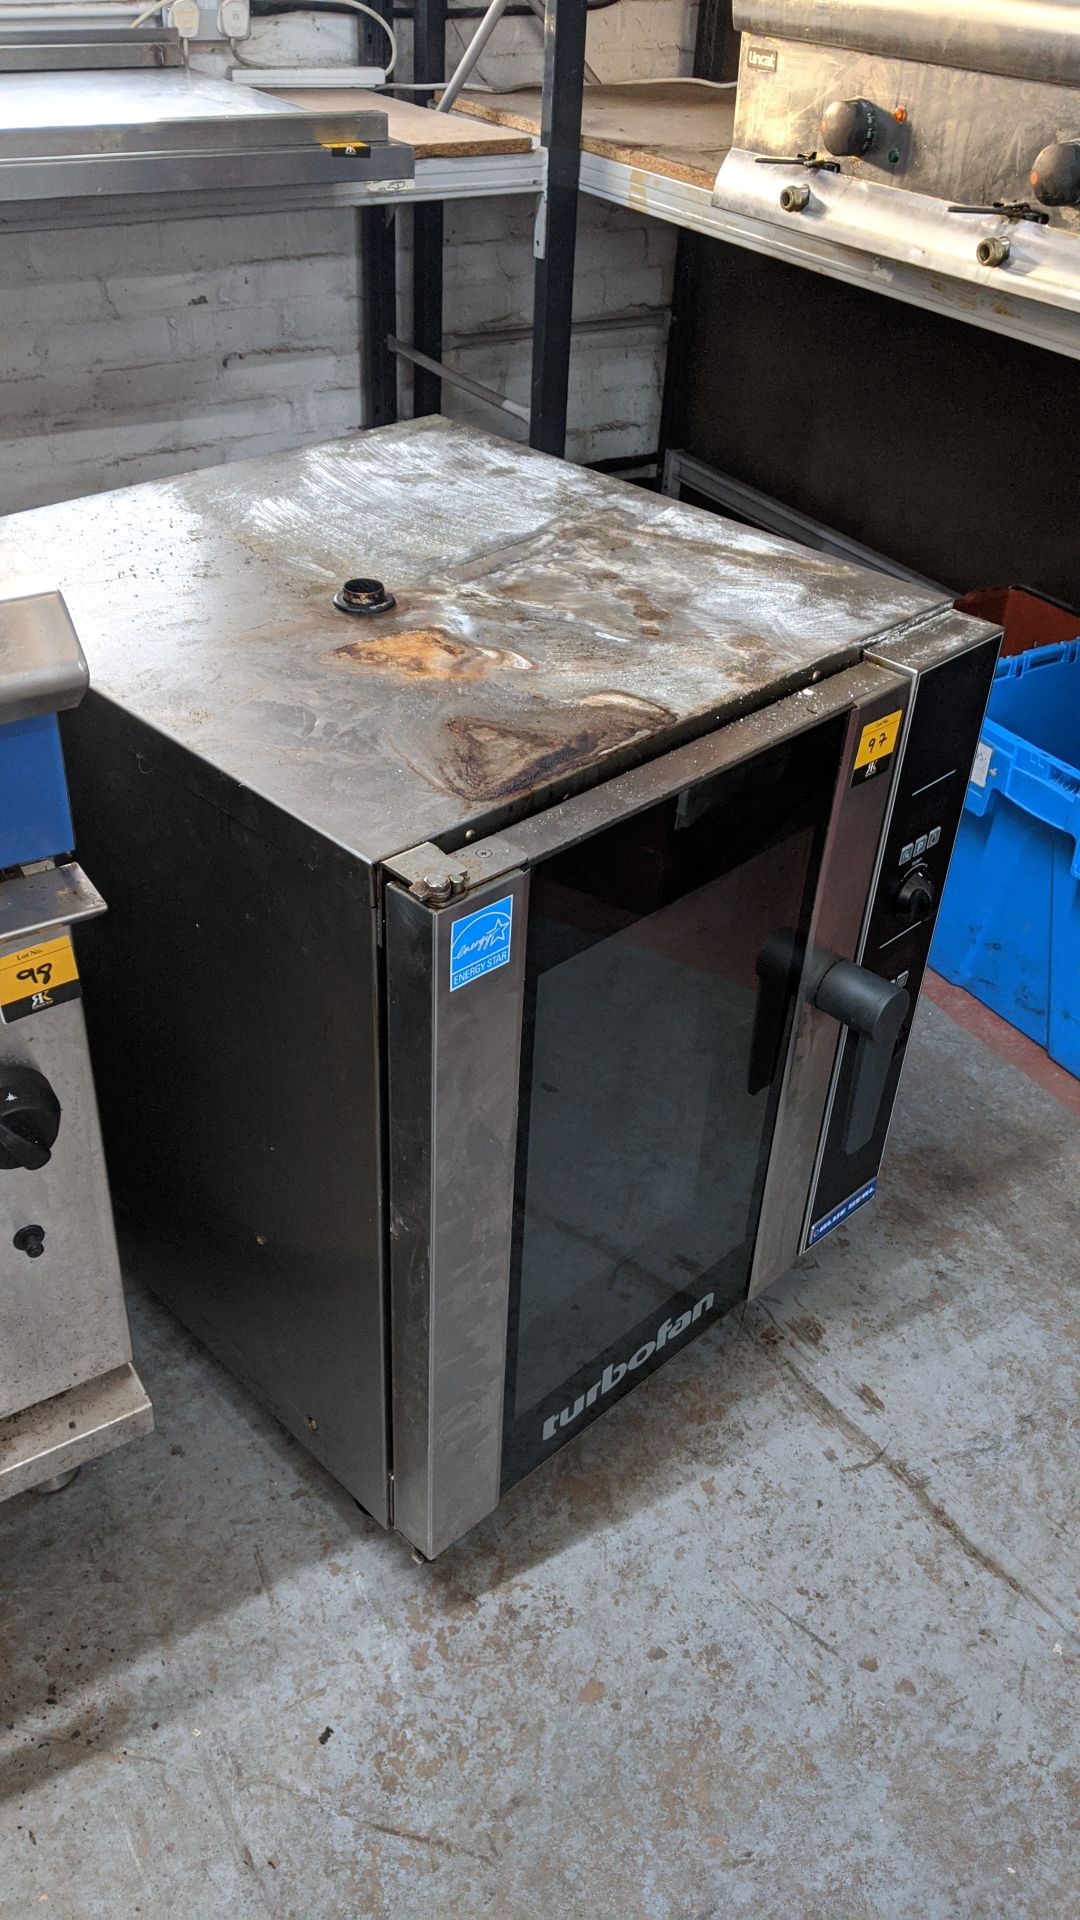 Blue Seal turbo fan oven, purchased new for £1,930 plus VAT . This is one of three items purchased - Image 8 of 15